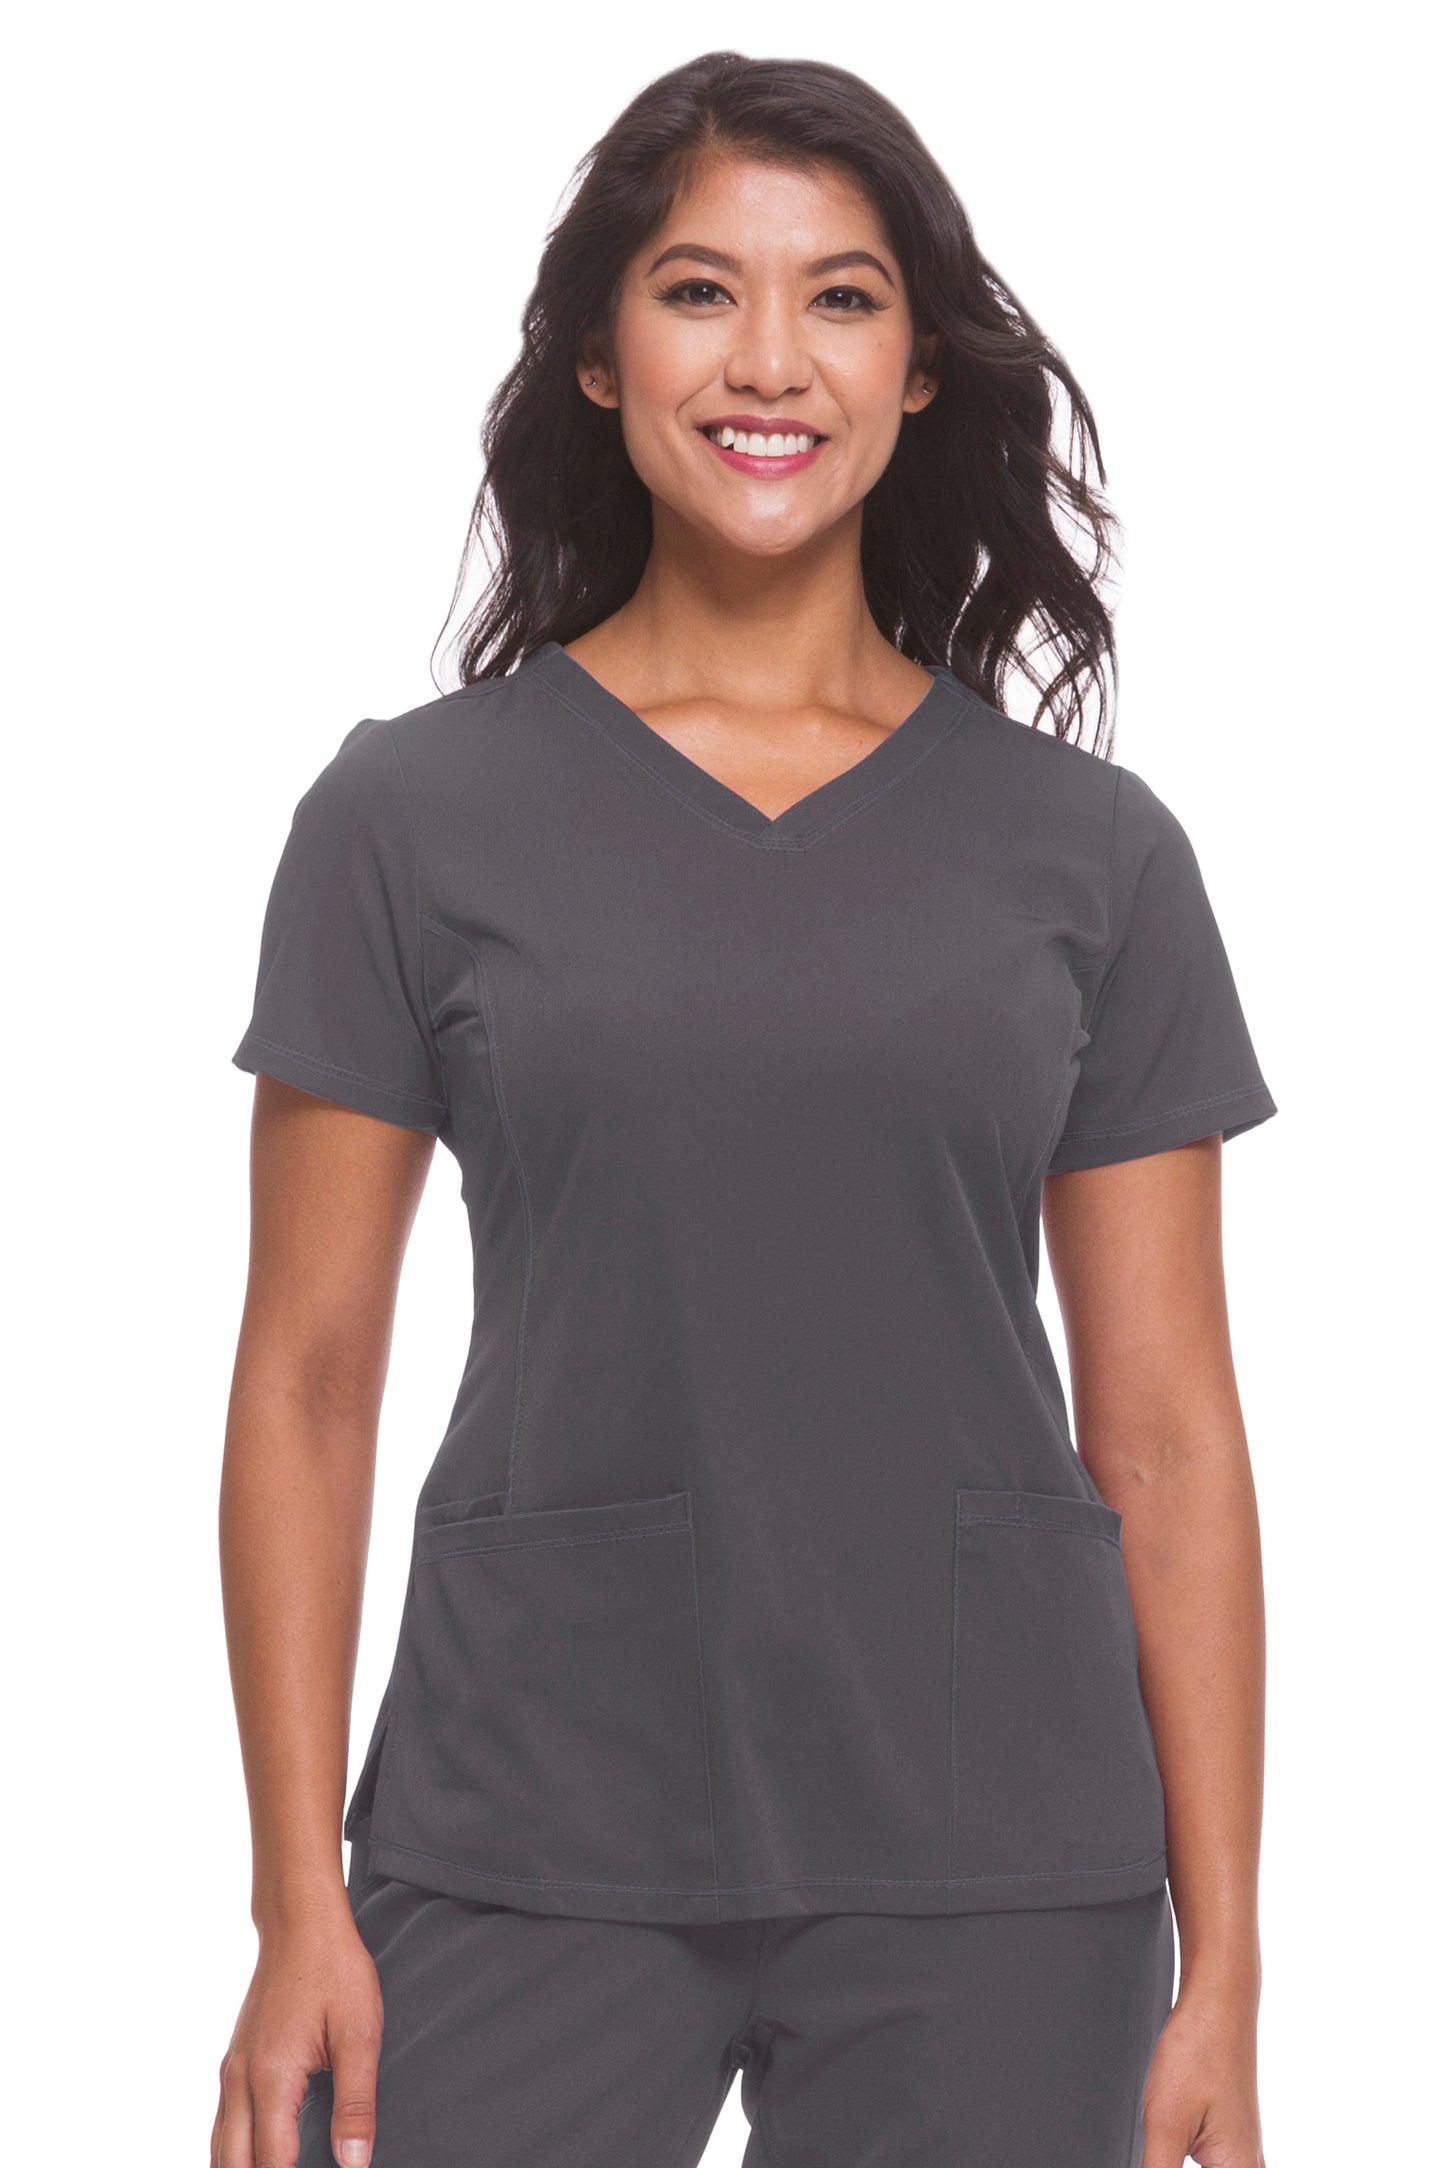 Healing Hands HH Works Monica V-Neck Scrub Top in Pewter at Parker's Clothing and Shoes